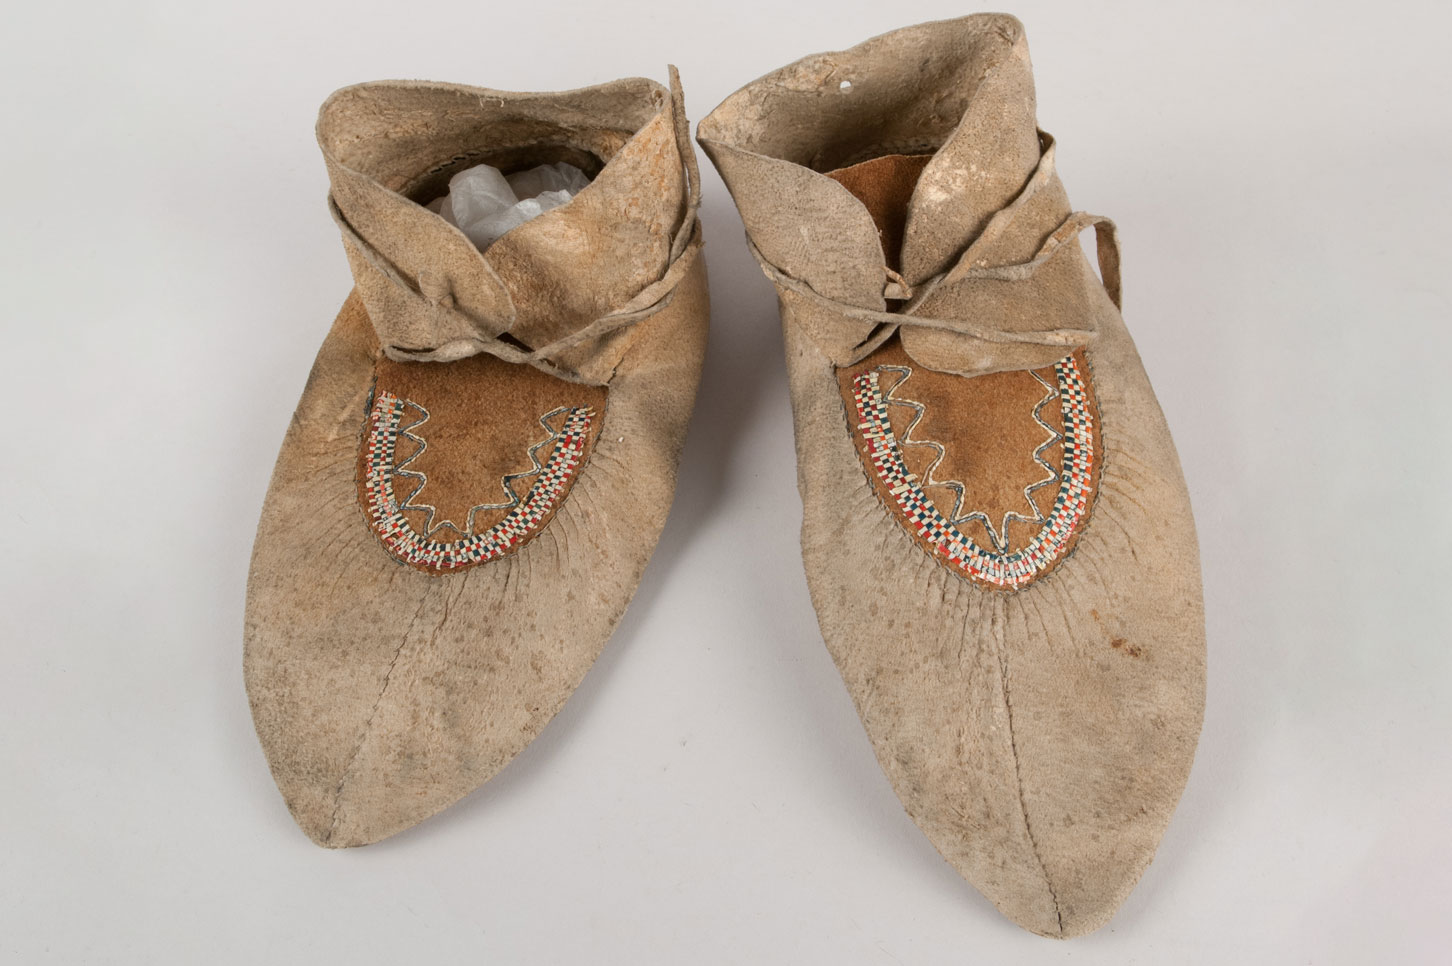 Pair of quillwork moccasins made from two pieces of hide. Quillwork design is a checkered weave of red, blue, and yellow quills.